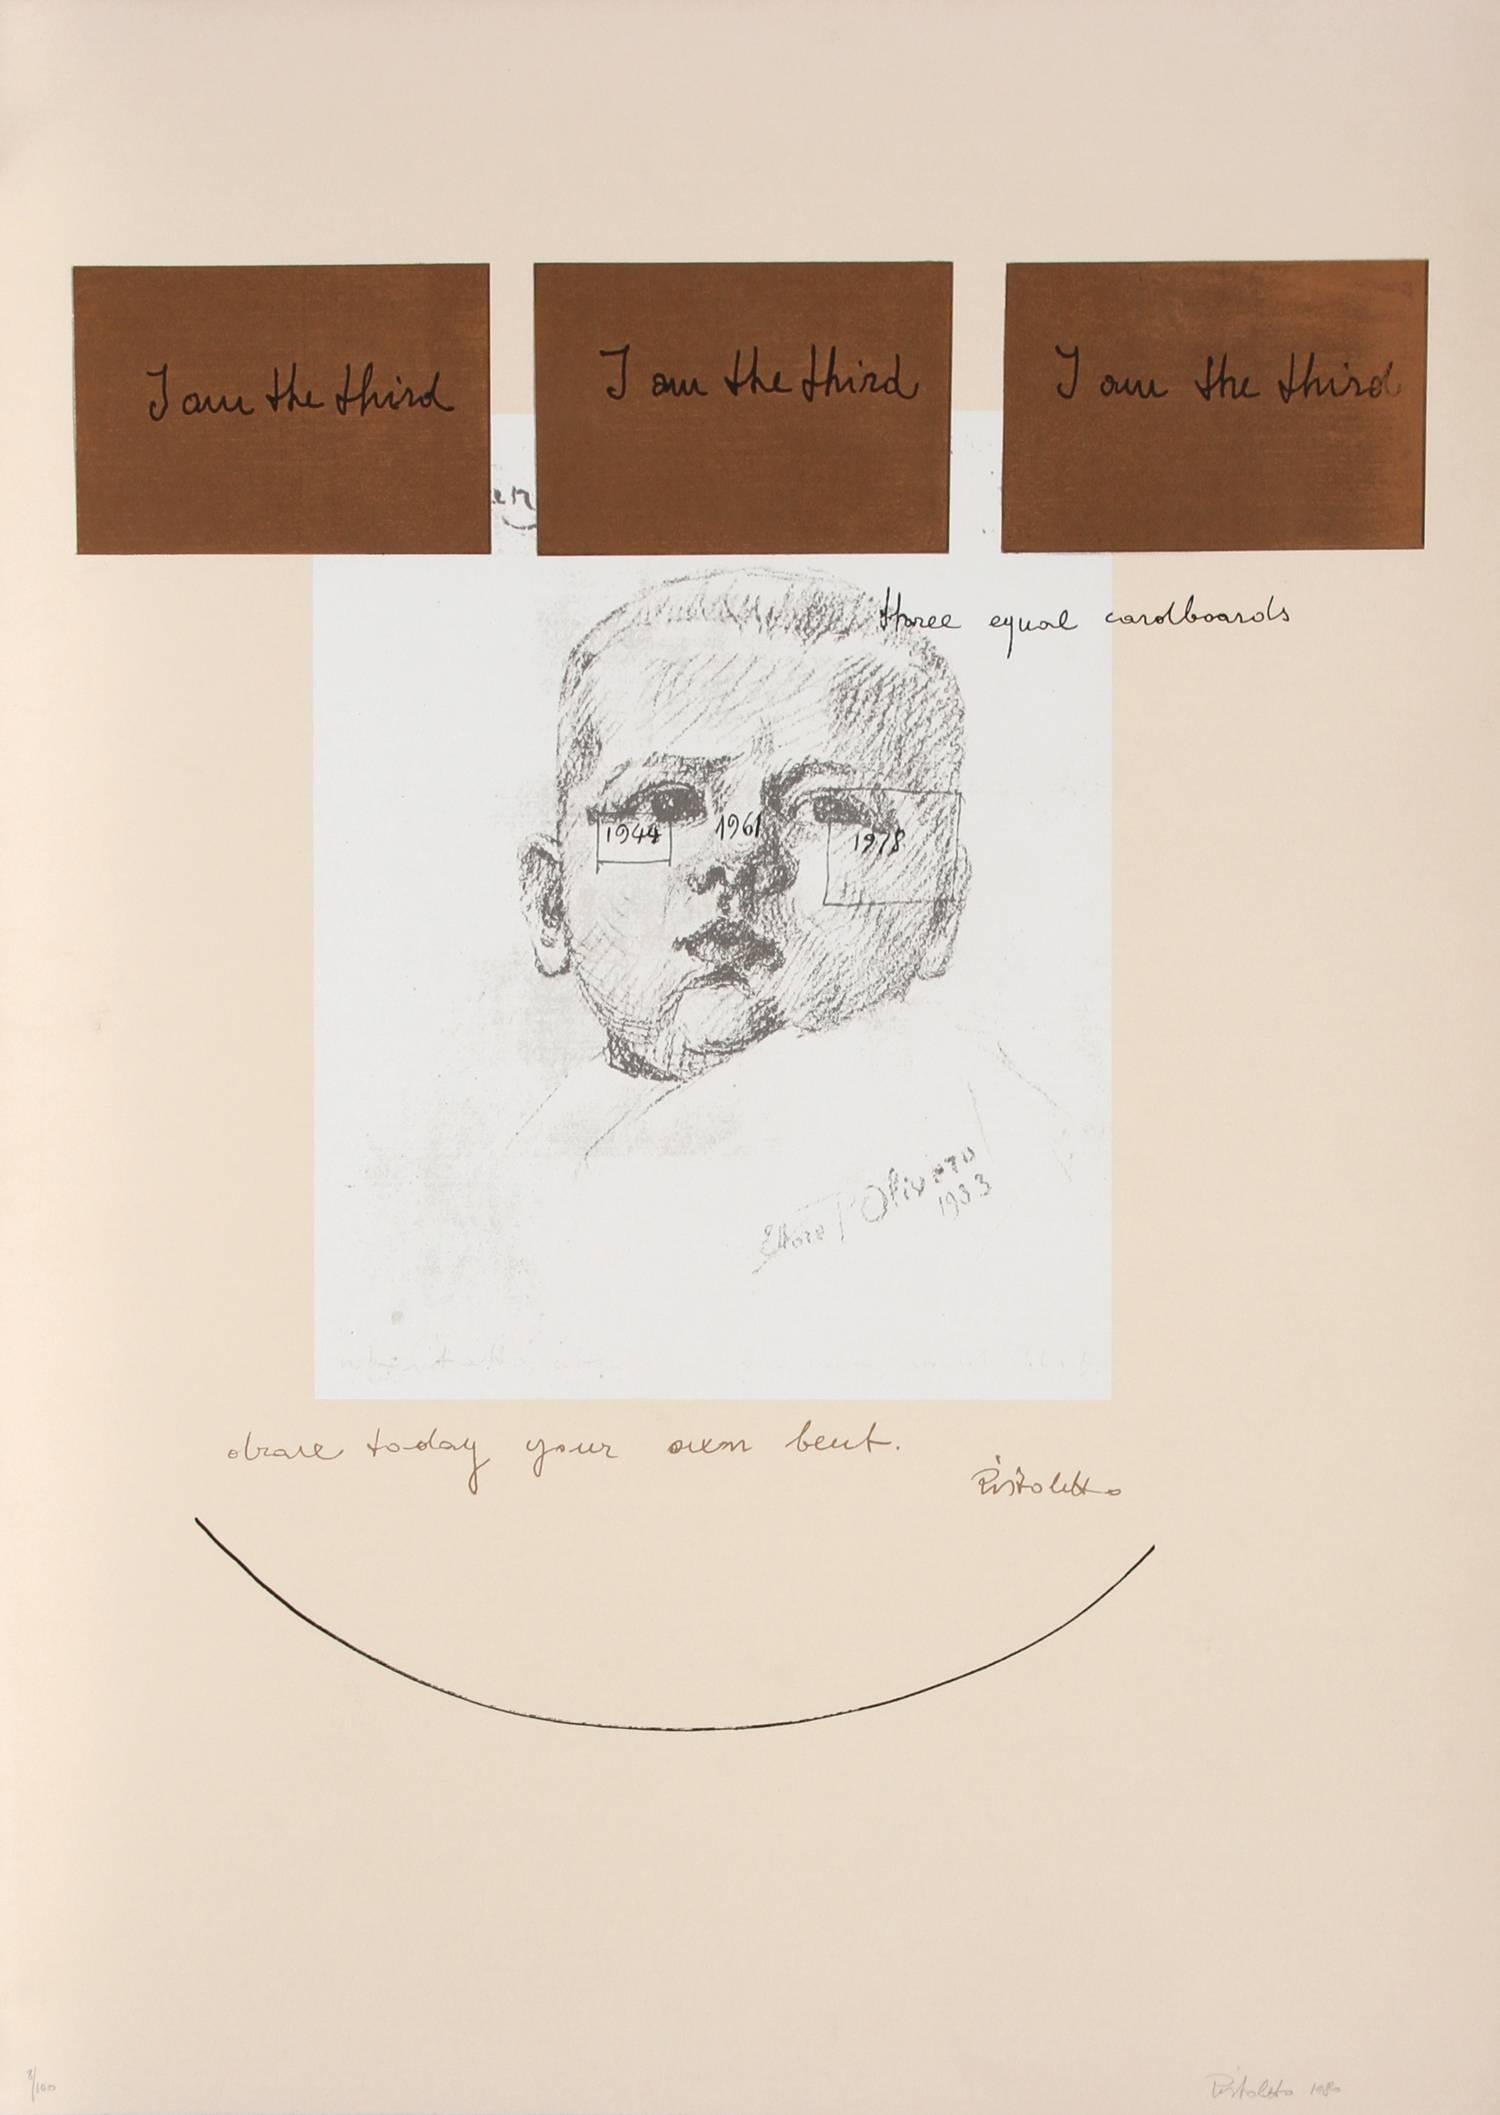 Artist: Michelangelo Pistoletto, Italian (1933 - )
Title: III from the I am Third Series
Year: 1980    
Medium: Silkscreen, signed and numbered in pencil
Edition: 100
Paper Size: 42 x 29 inches